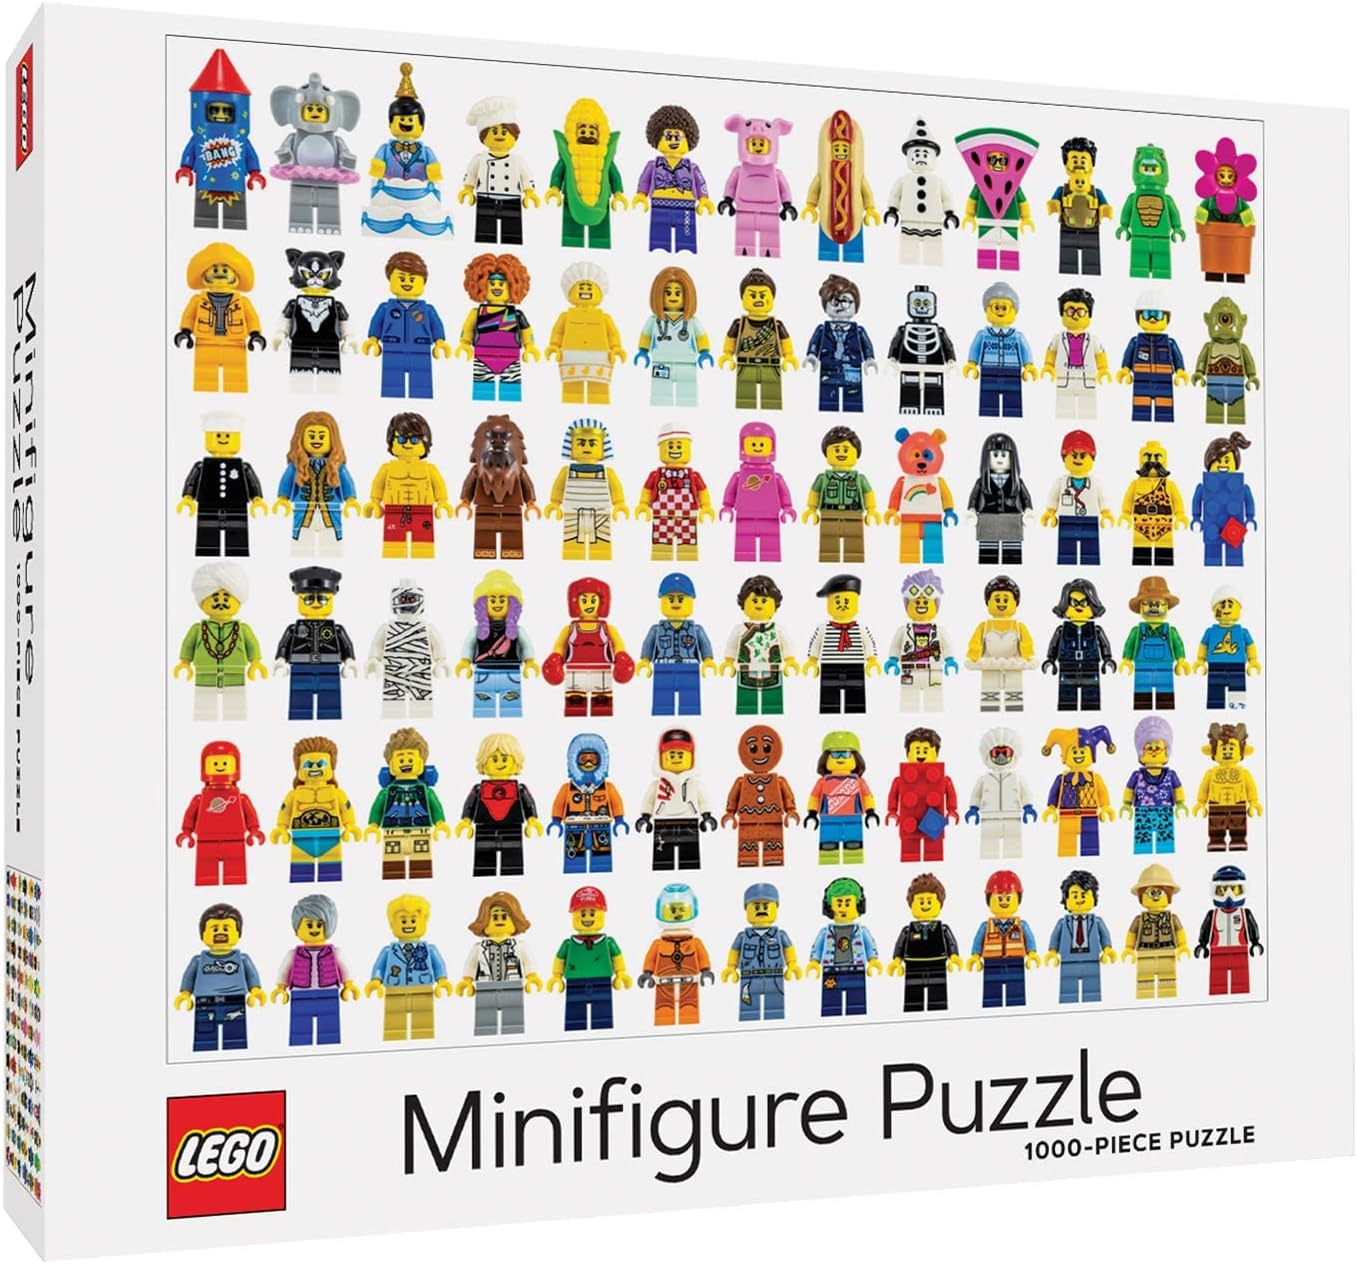 1000-Piece LEGO Minifigure Jigsaw Puzzles $6.95 + Free Shipping w/ Prime or on $35+